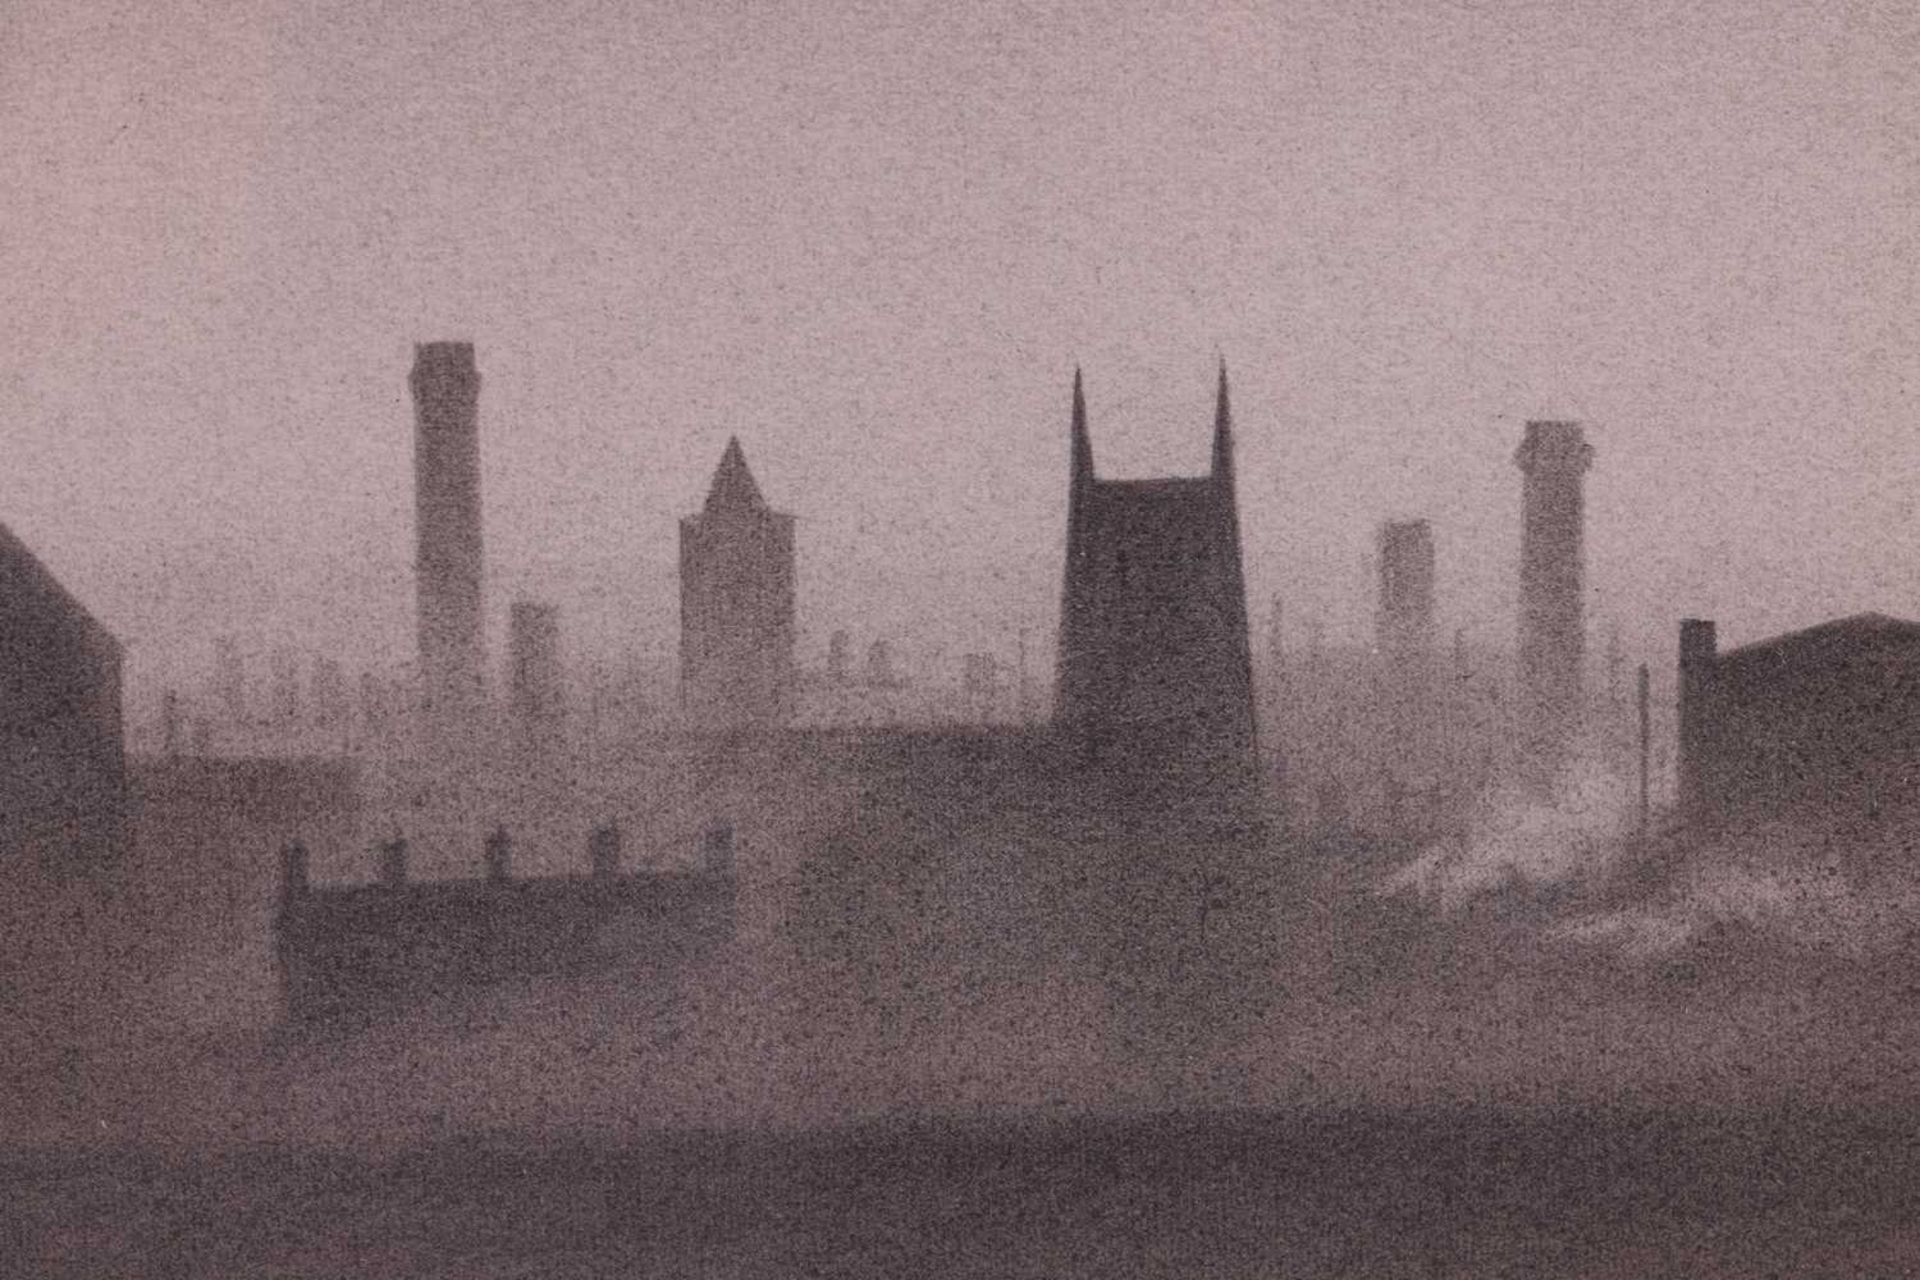 Trevor Grimshaw (1947 - 2001), Northern Industrial Scene, signed and dated 'T. Grimshaw '70' in penc - Image 5 of 12